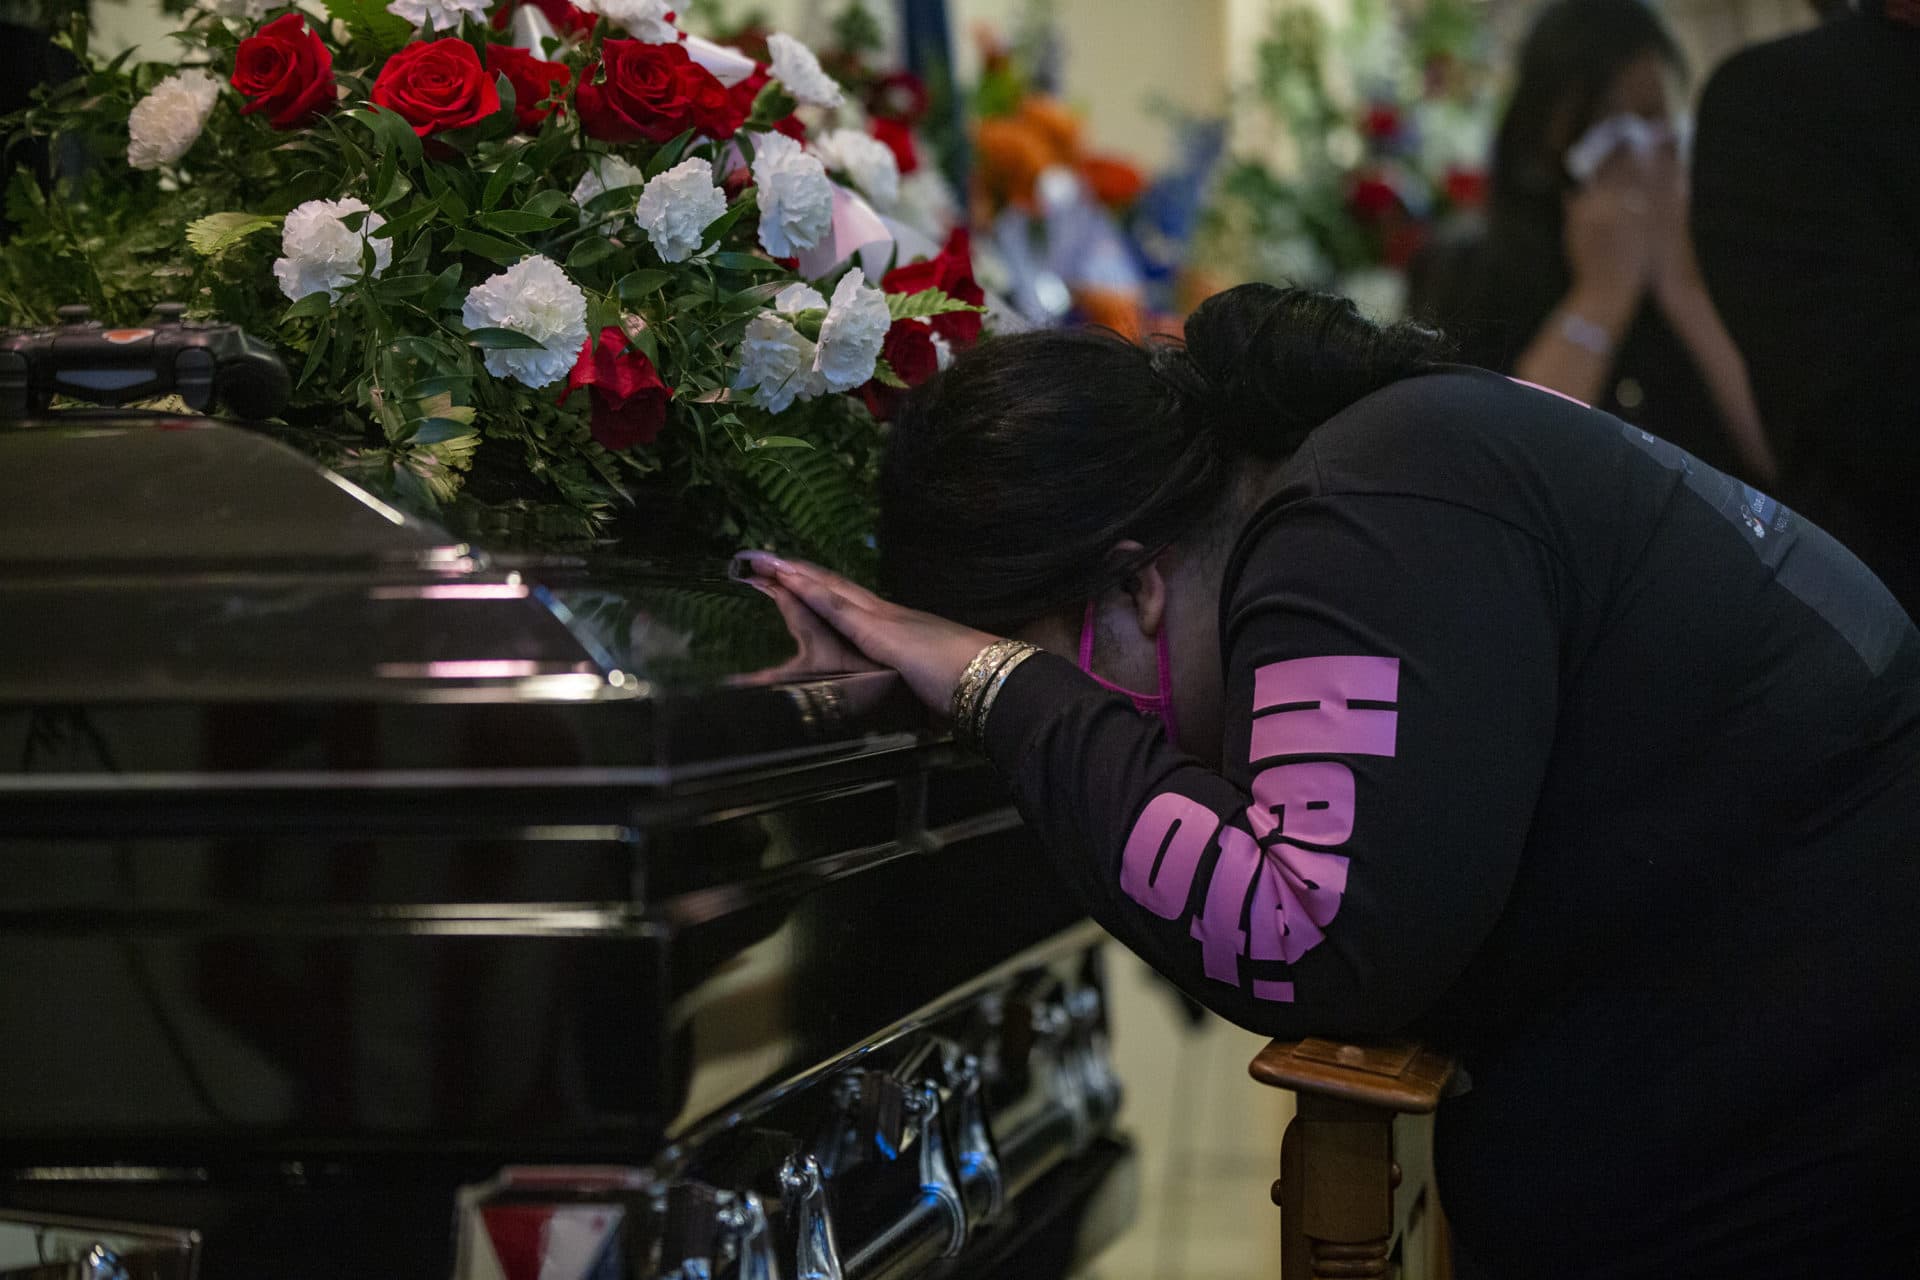 Tina Tapia, Henry Tapia’s sister, grieves as she places her head on his casket. (Jesse Costa/WBUR)